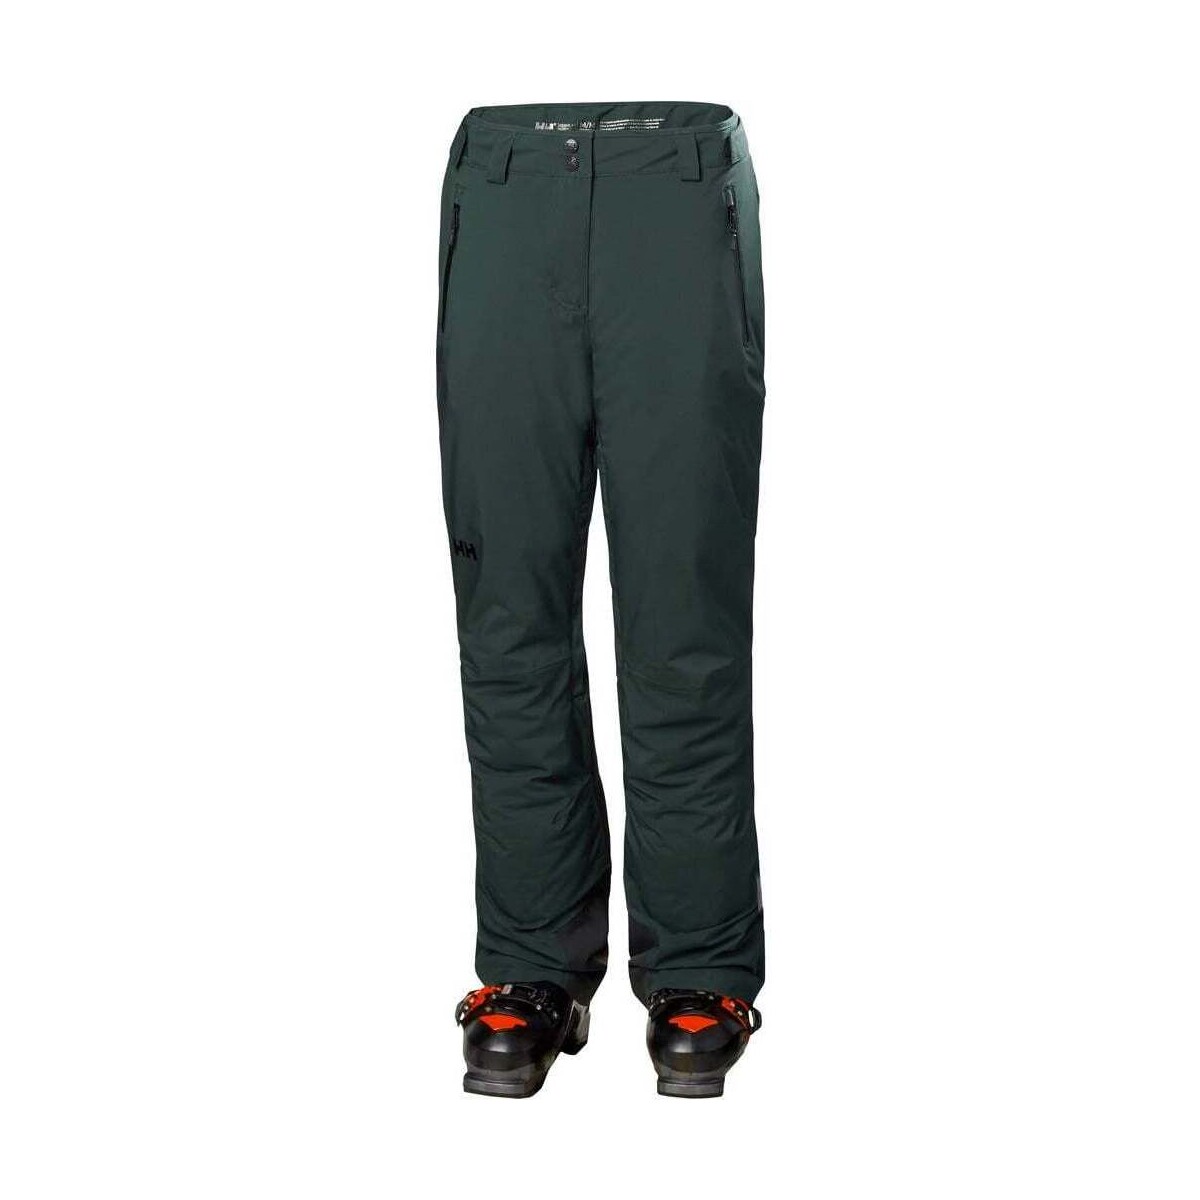 textil Mujer Pantalones de chándal Helly Hansen W LEGENDARY INSULATED PANT Multicolor